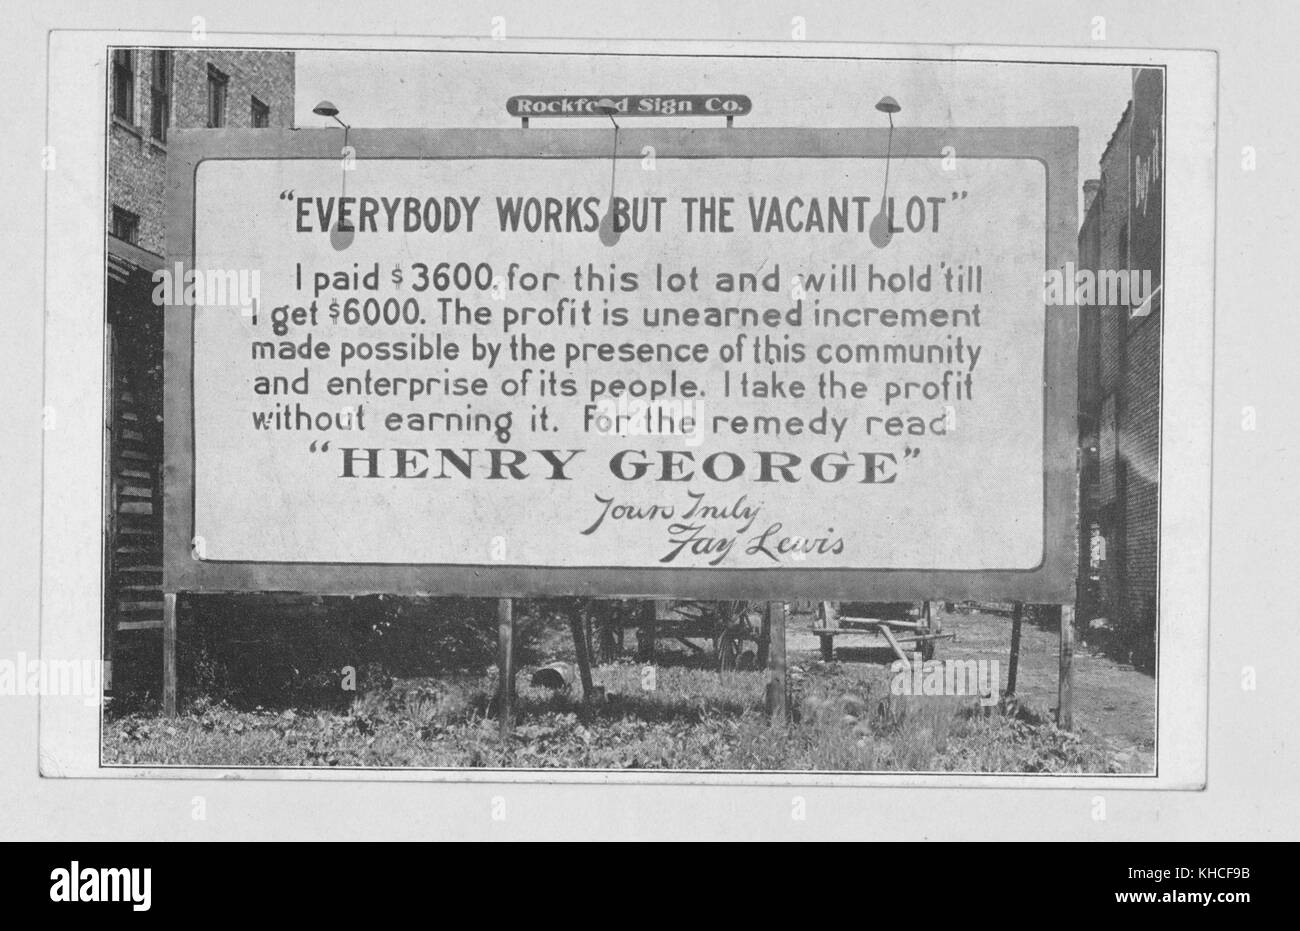 A photograph of a sign that features a quote from Henry George, who was a political economist and philosopher, the sign promoted his literature by pointing out what he saw as one of the problems with the American economy, 1900. From the New York Public Library. Stock Photo